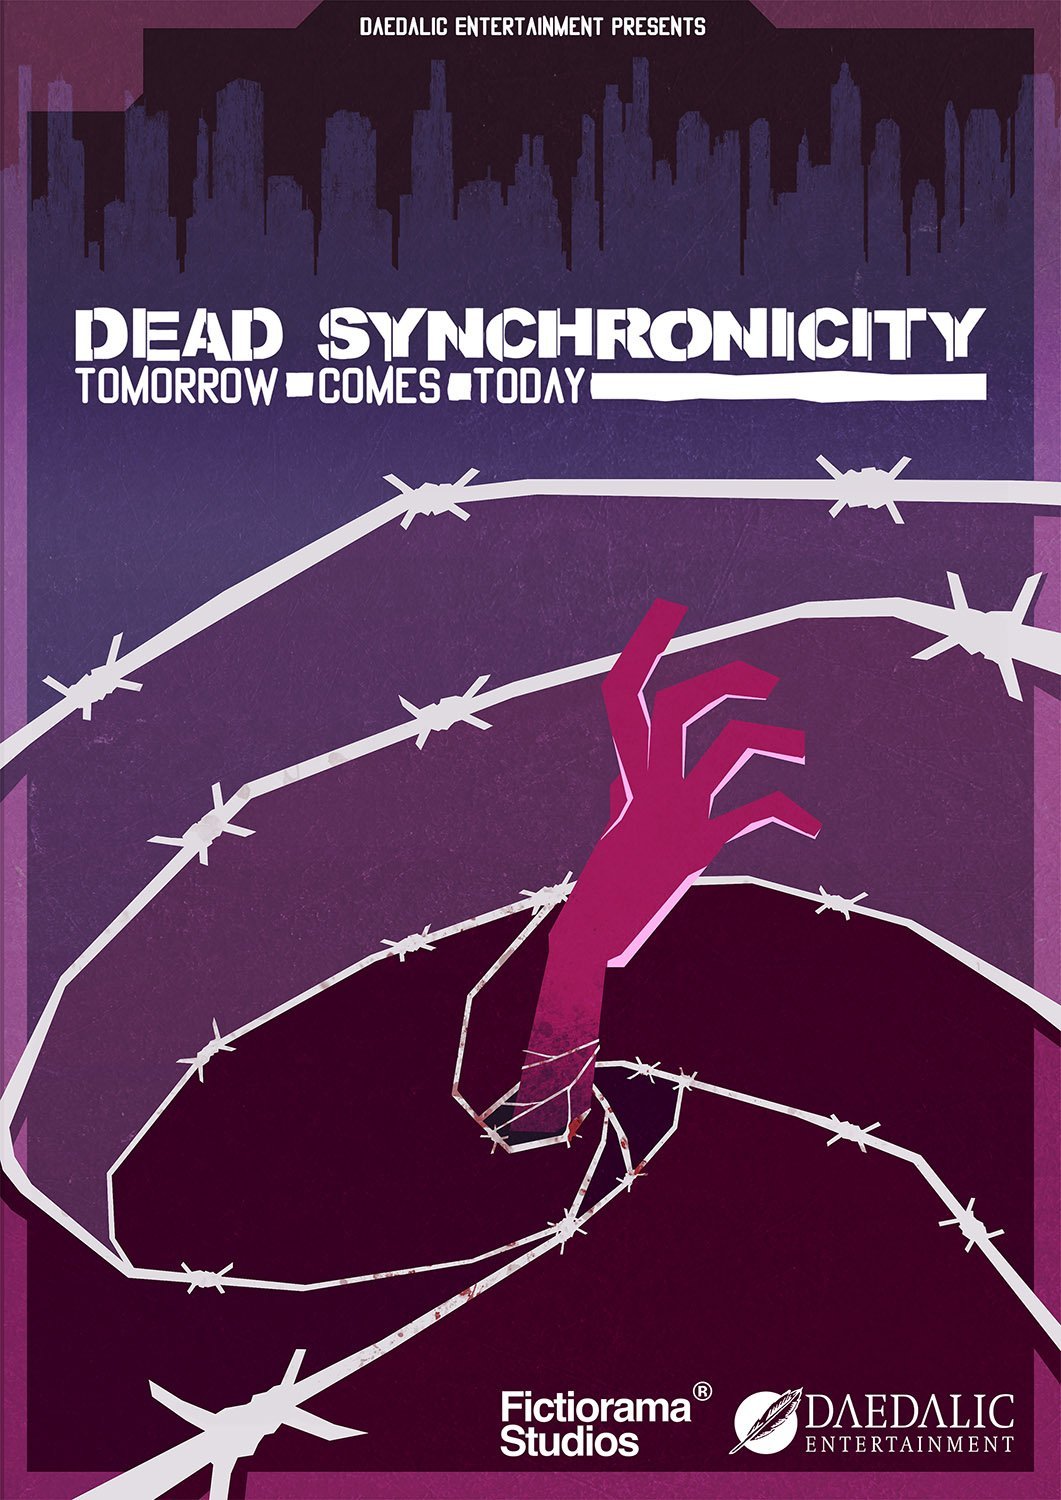 Dead Synchronicity: Tomorrow Comes Today v.1.0.10 [GOG] (2015) (2015)